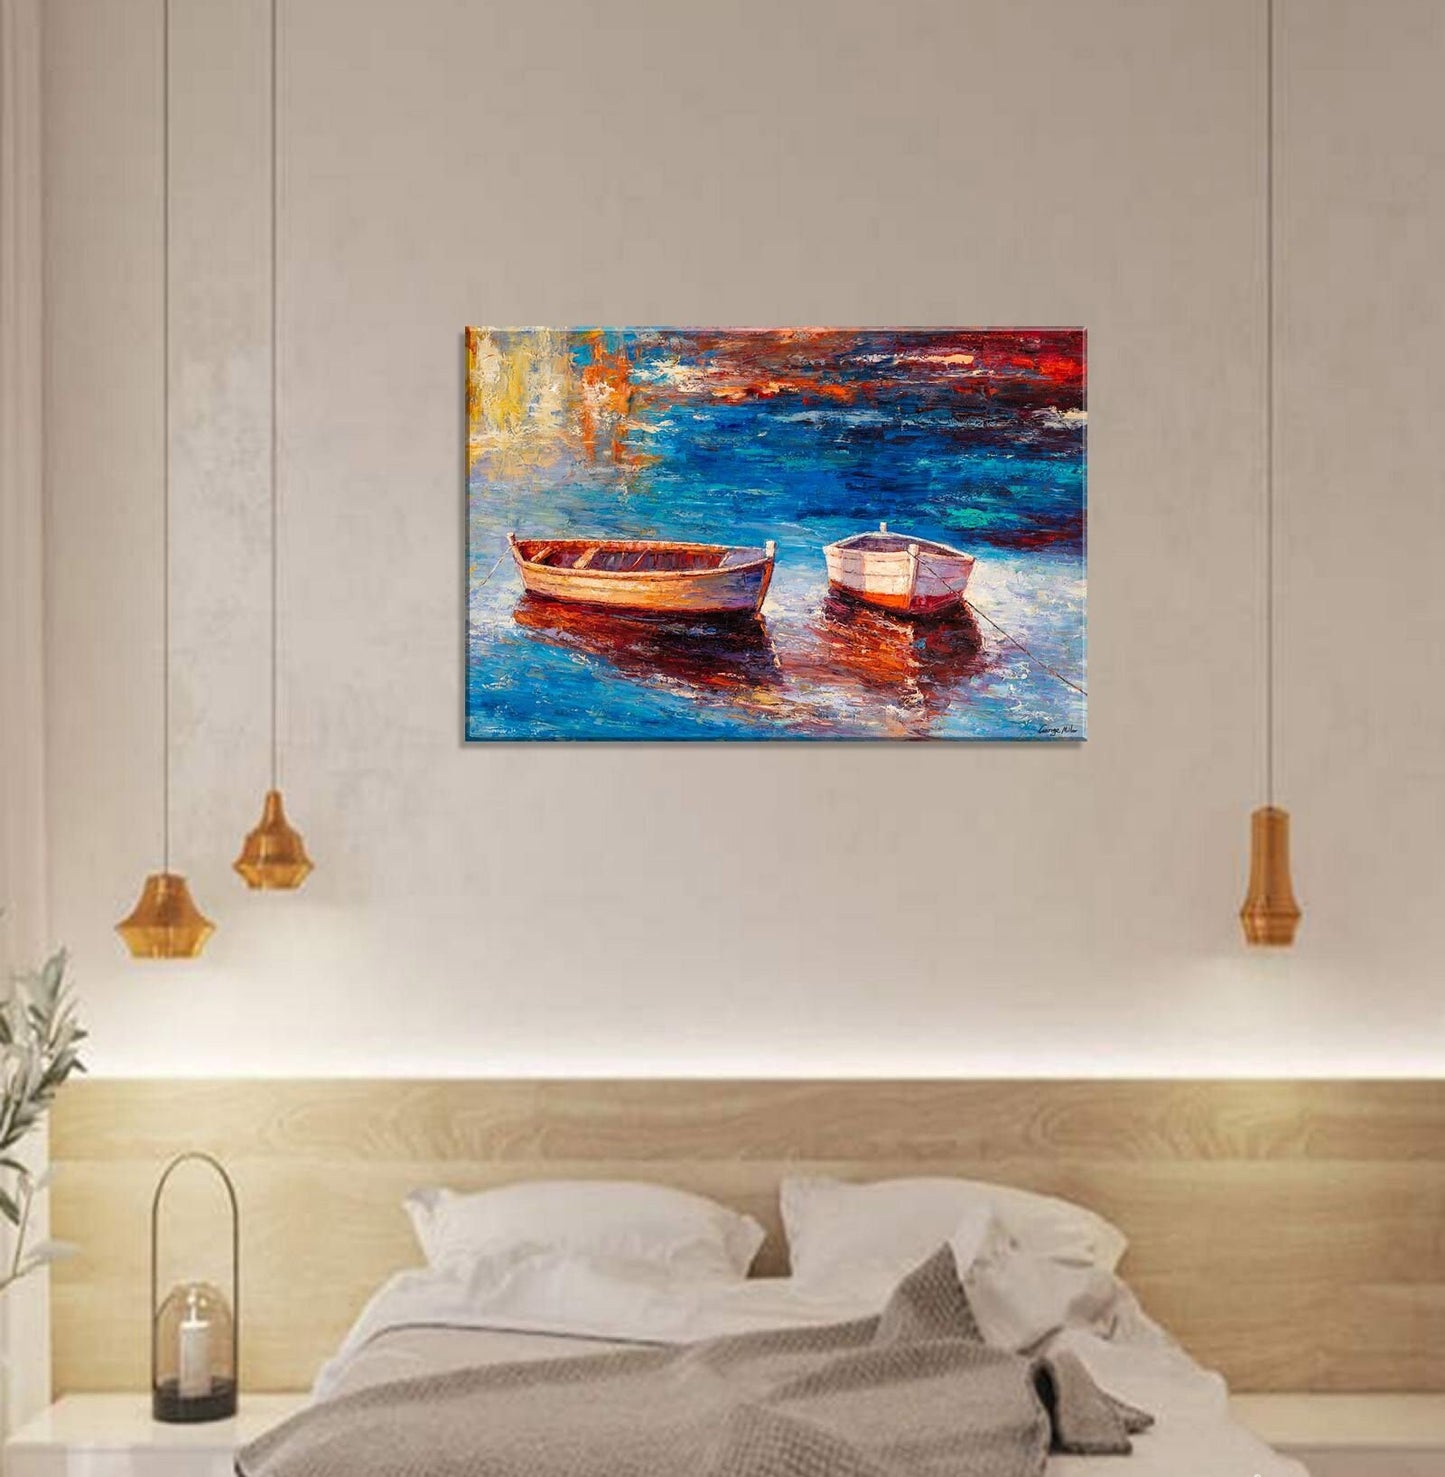 Large Oil Painting Fishing Boats, Large Wall Art Painting, Living Room Wall Art, Contemporary Art, Original Oil Painting Seascape, Original